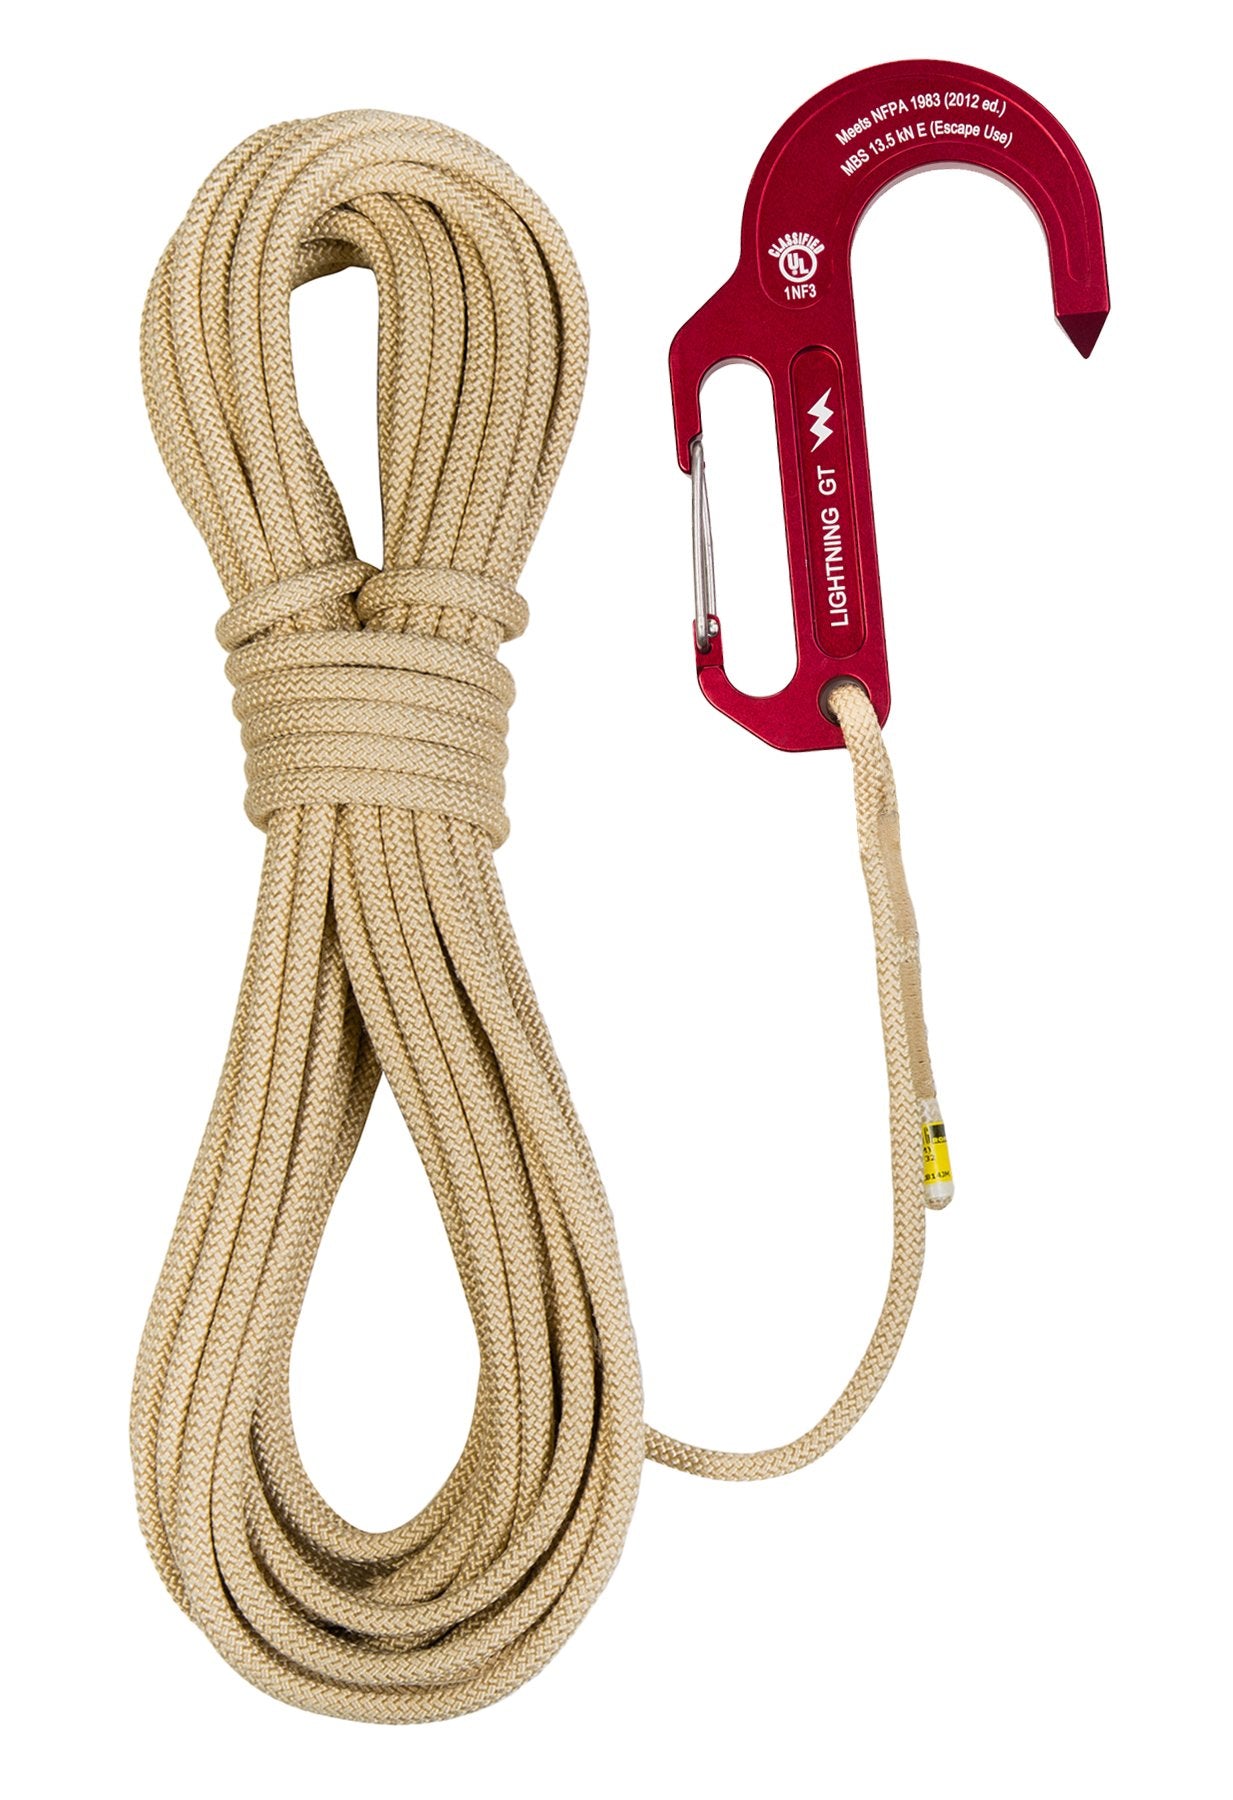 Search & Escape Ropes – East Coast Rescue Solutions